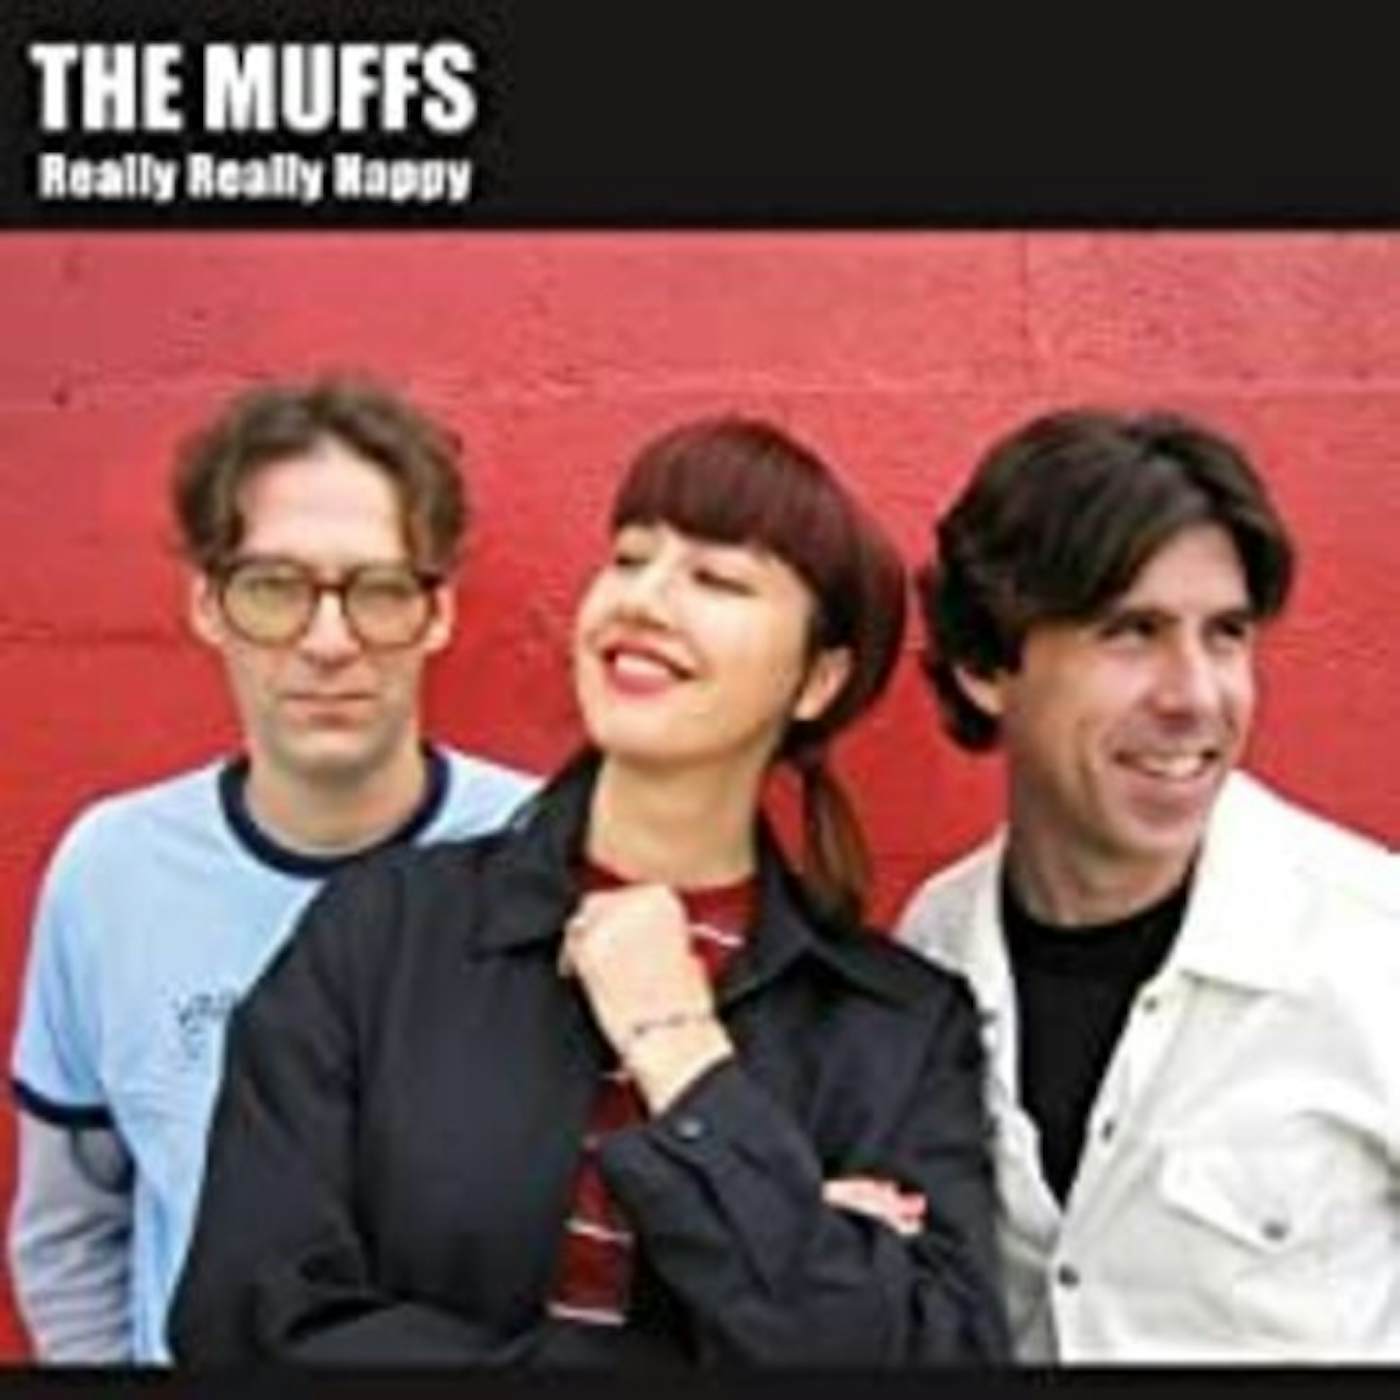 The Muffs REALLY REALLY HAPPY (2CD) CD